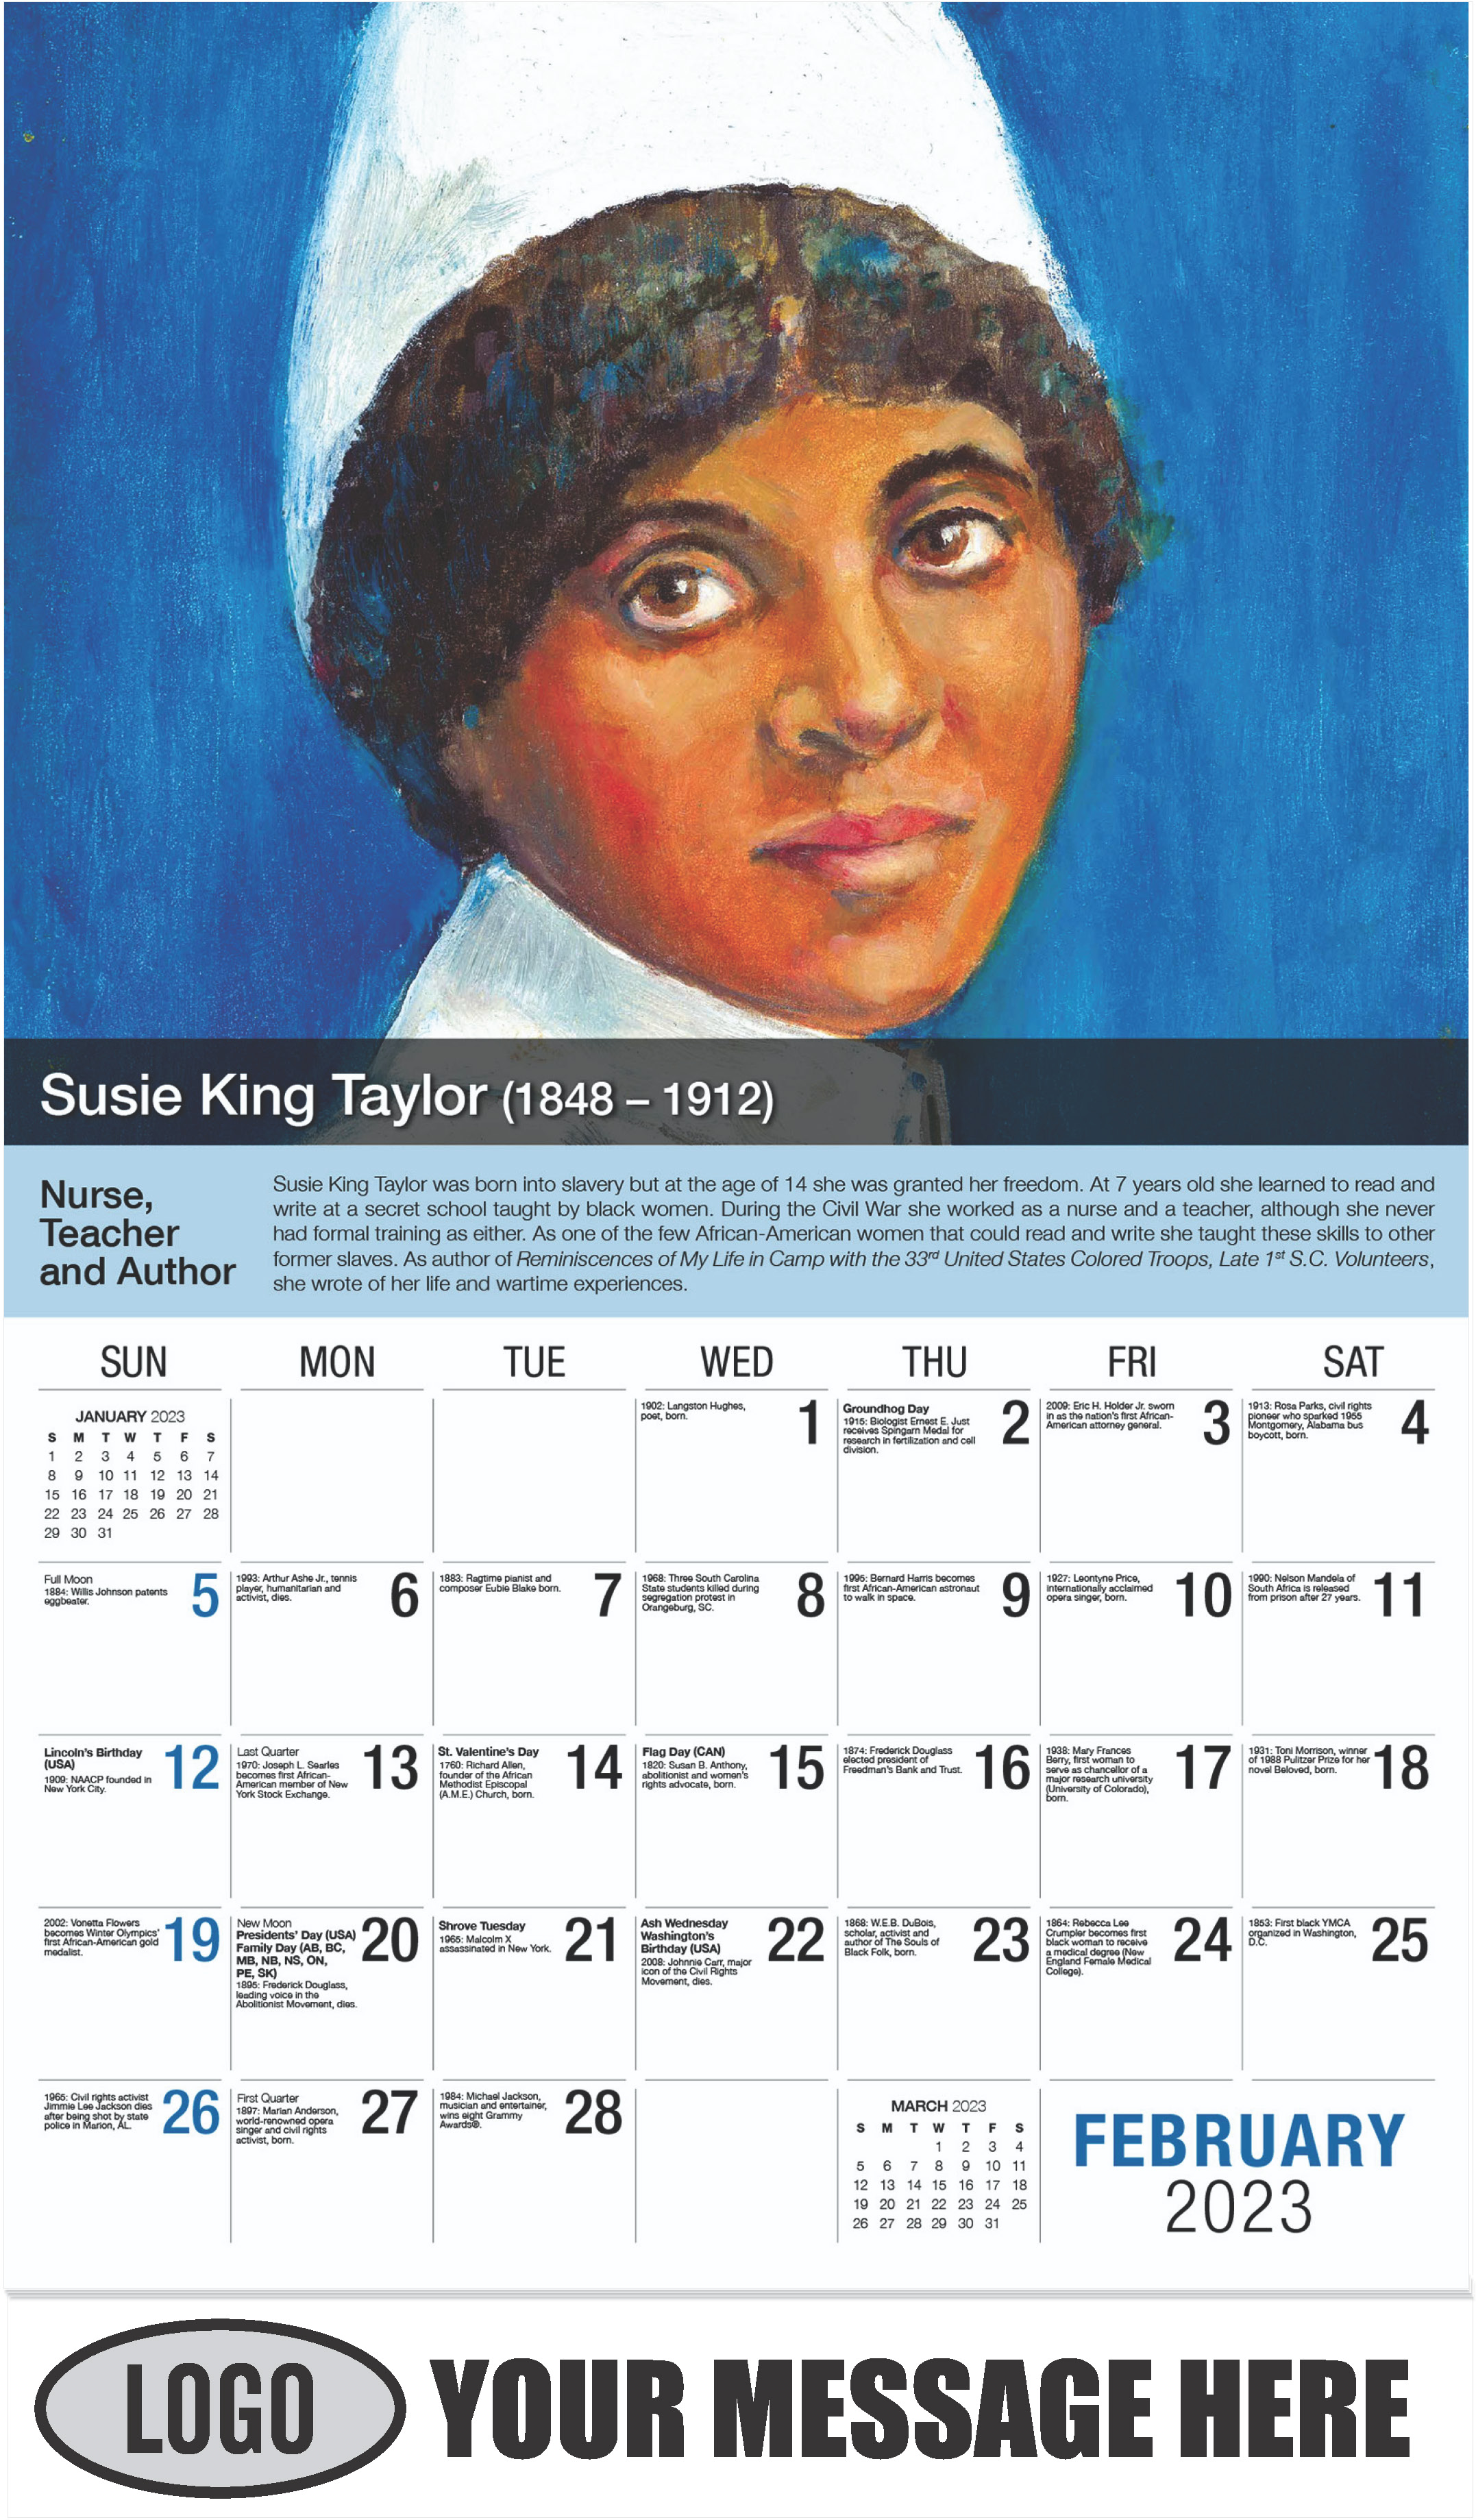 Susie King Taylor - February - Black History 2023 Promotional Calendar